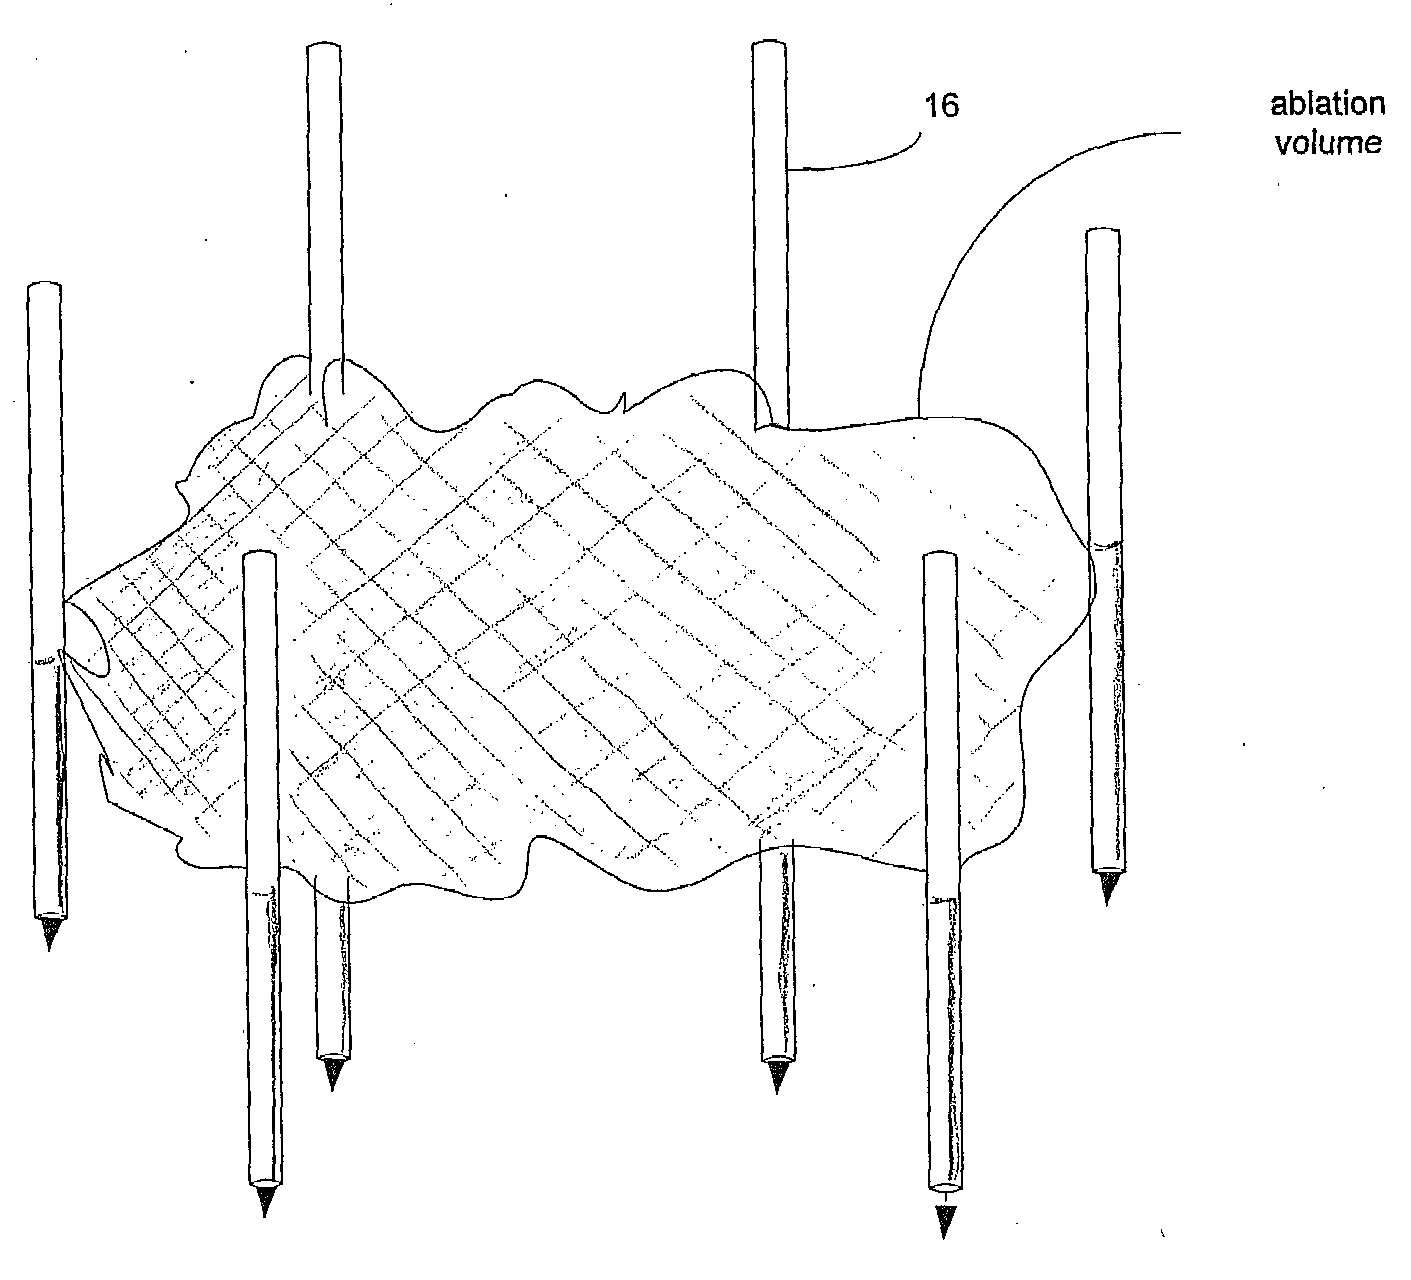 Methods and Systems for Treating BPH Using Electroporation